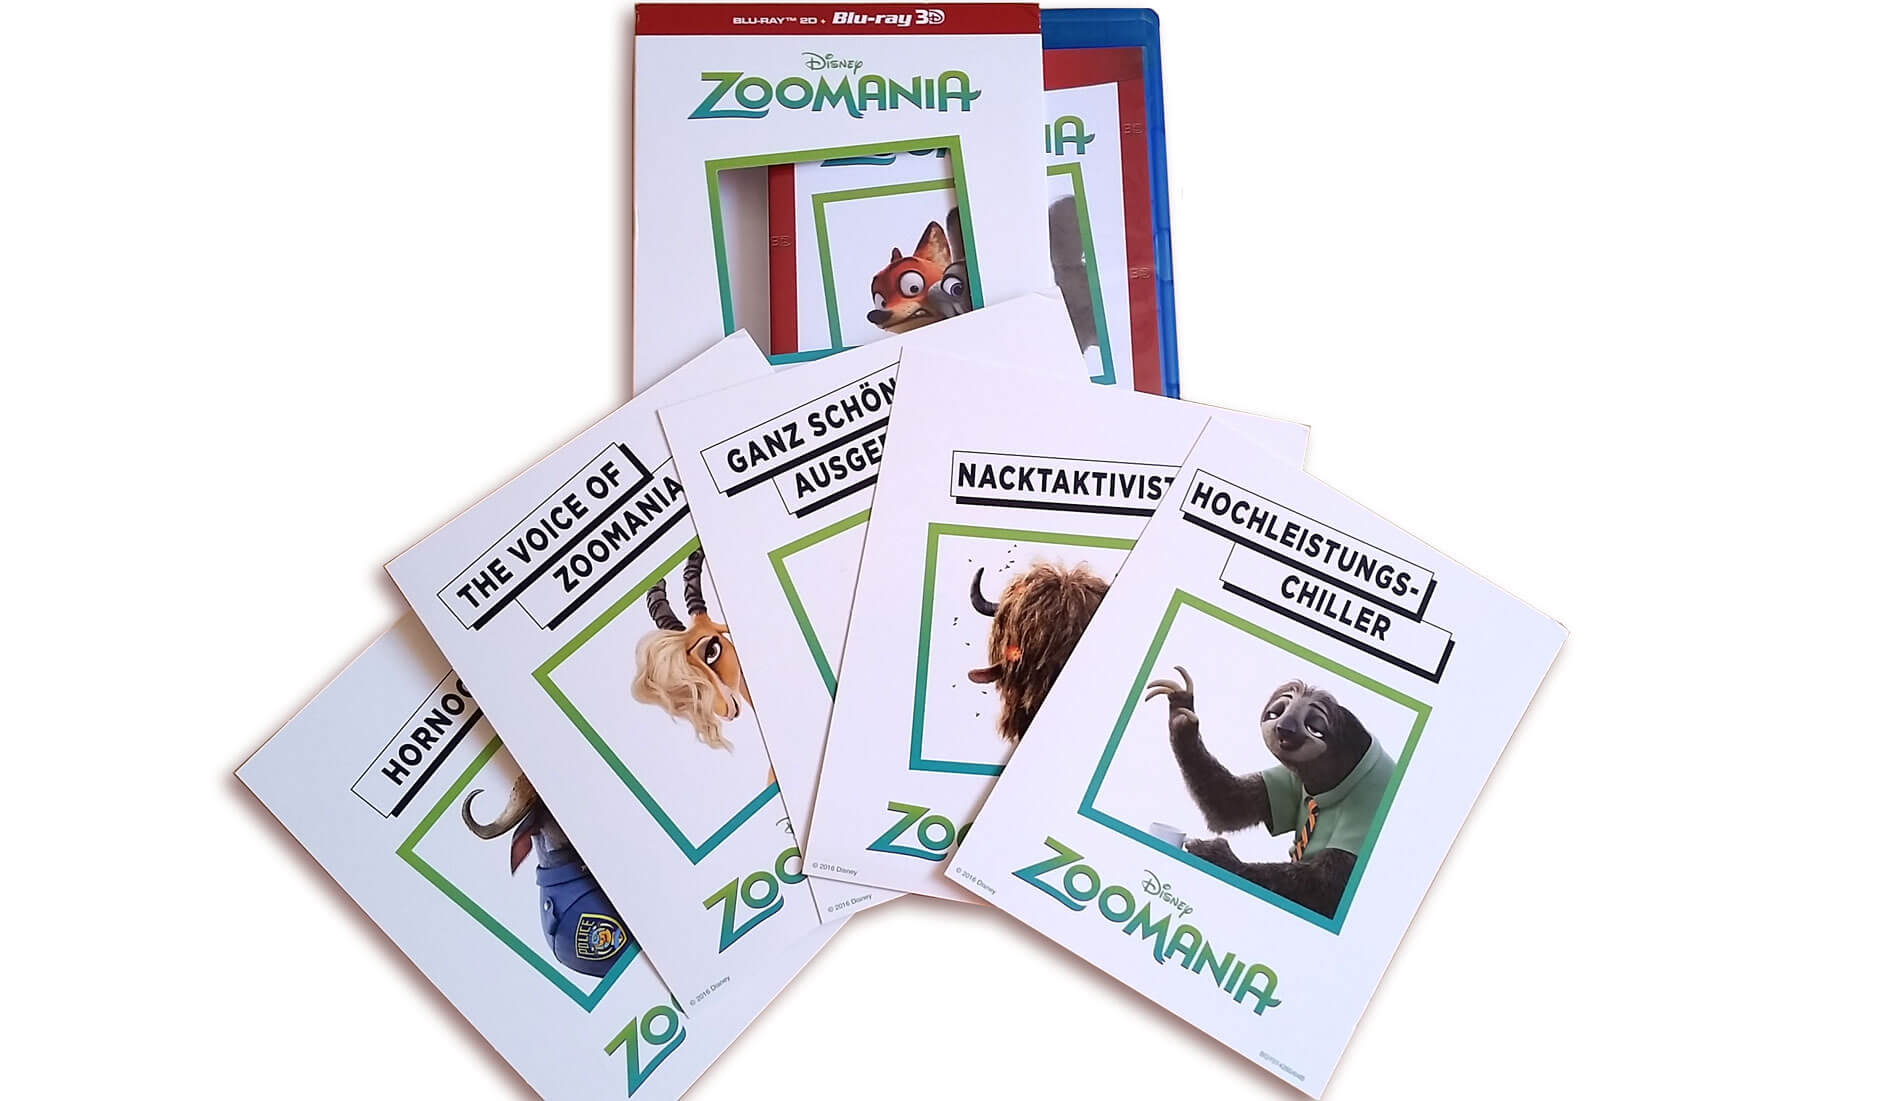 Zoomania Extras 3D Blu ray